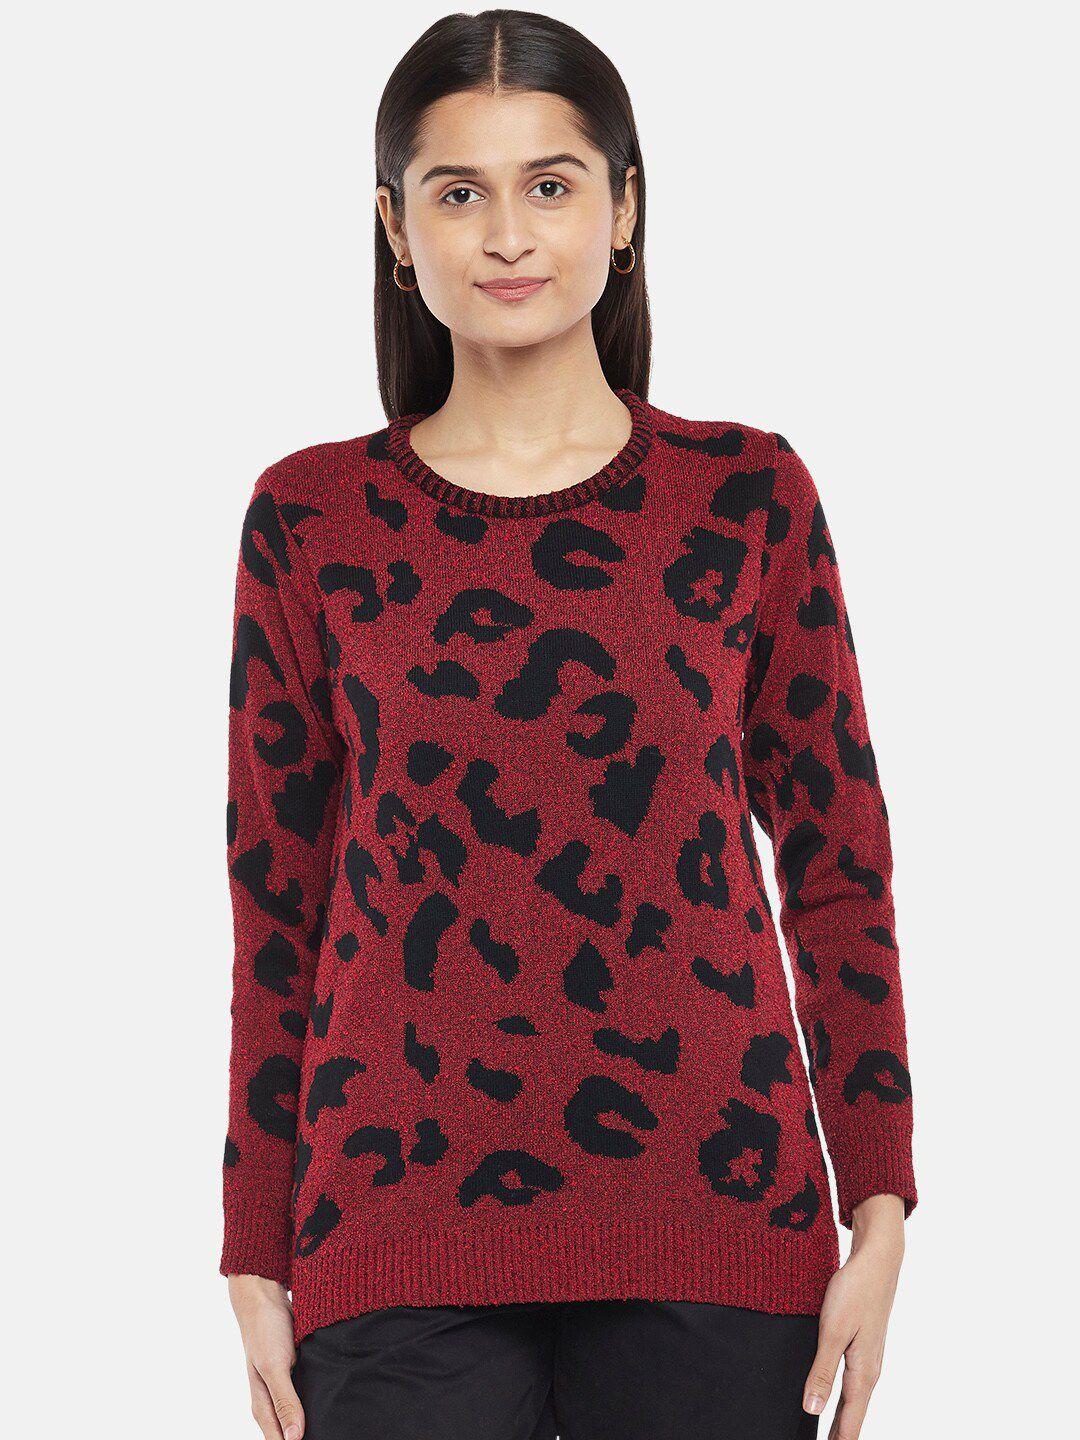 honey by pantaloons women red & black abstract printed pullover